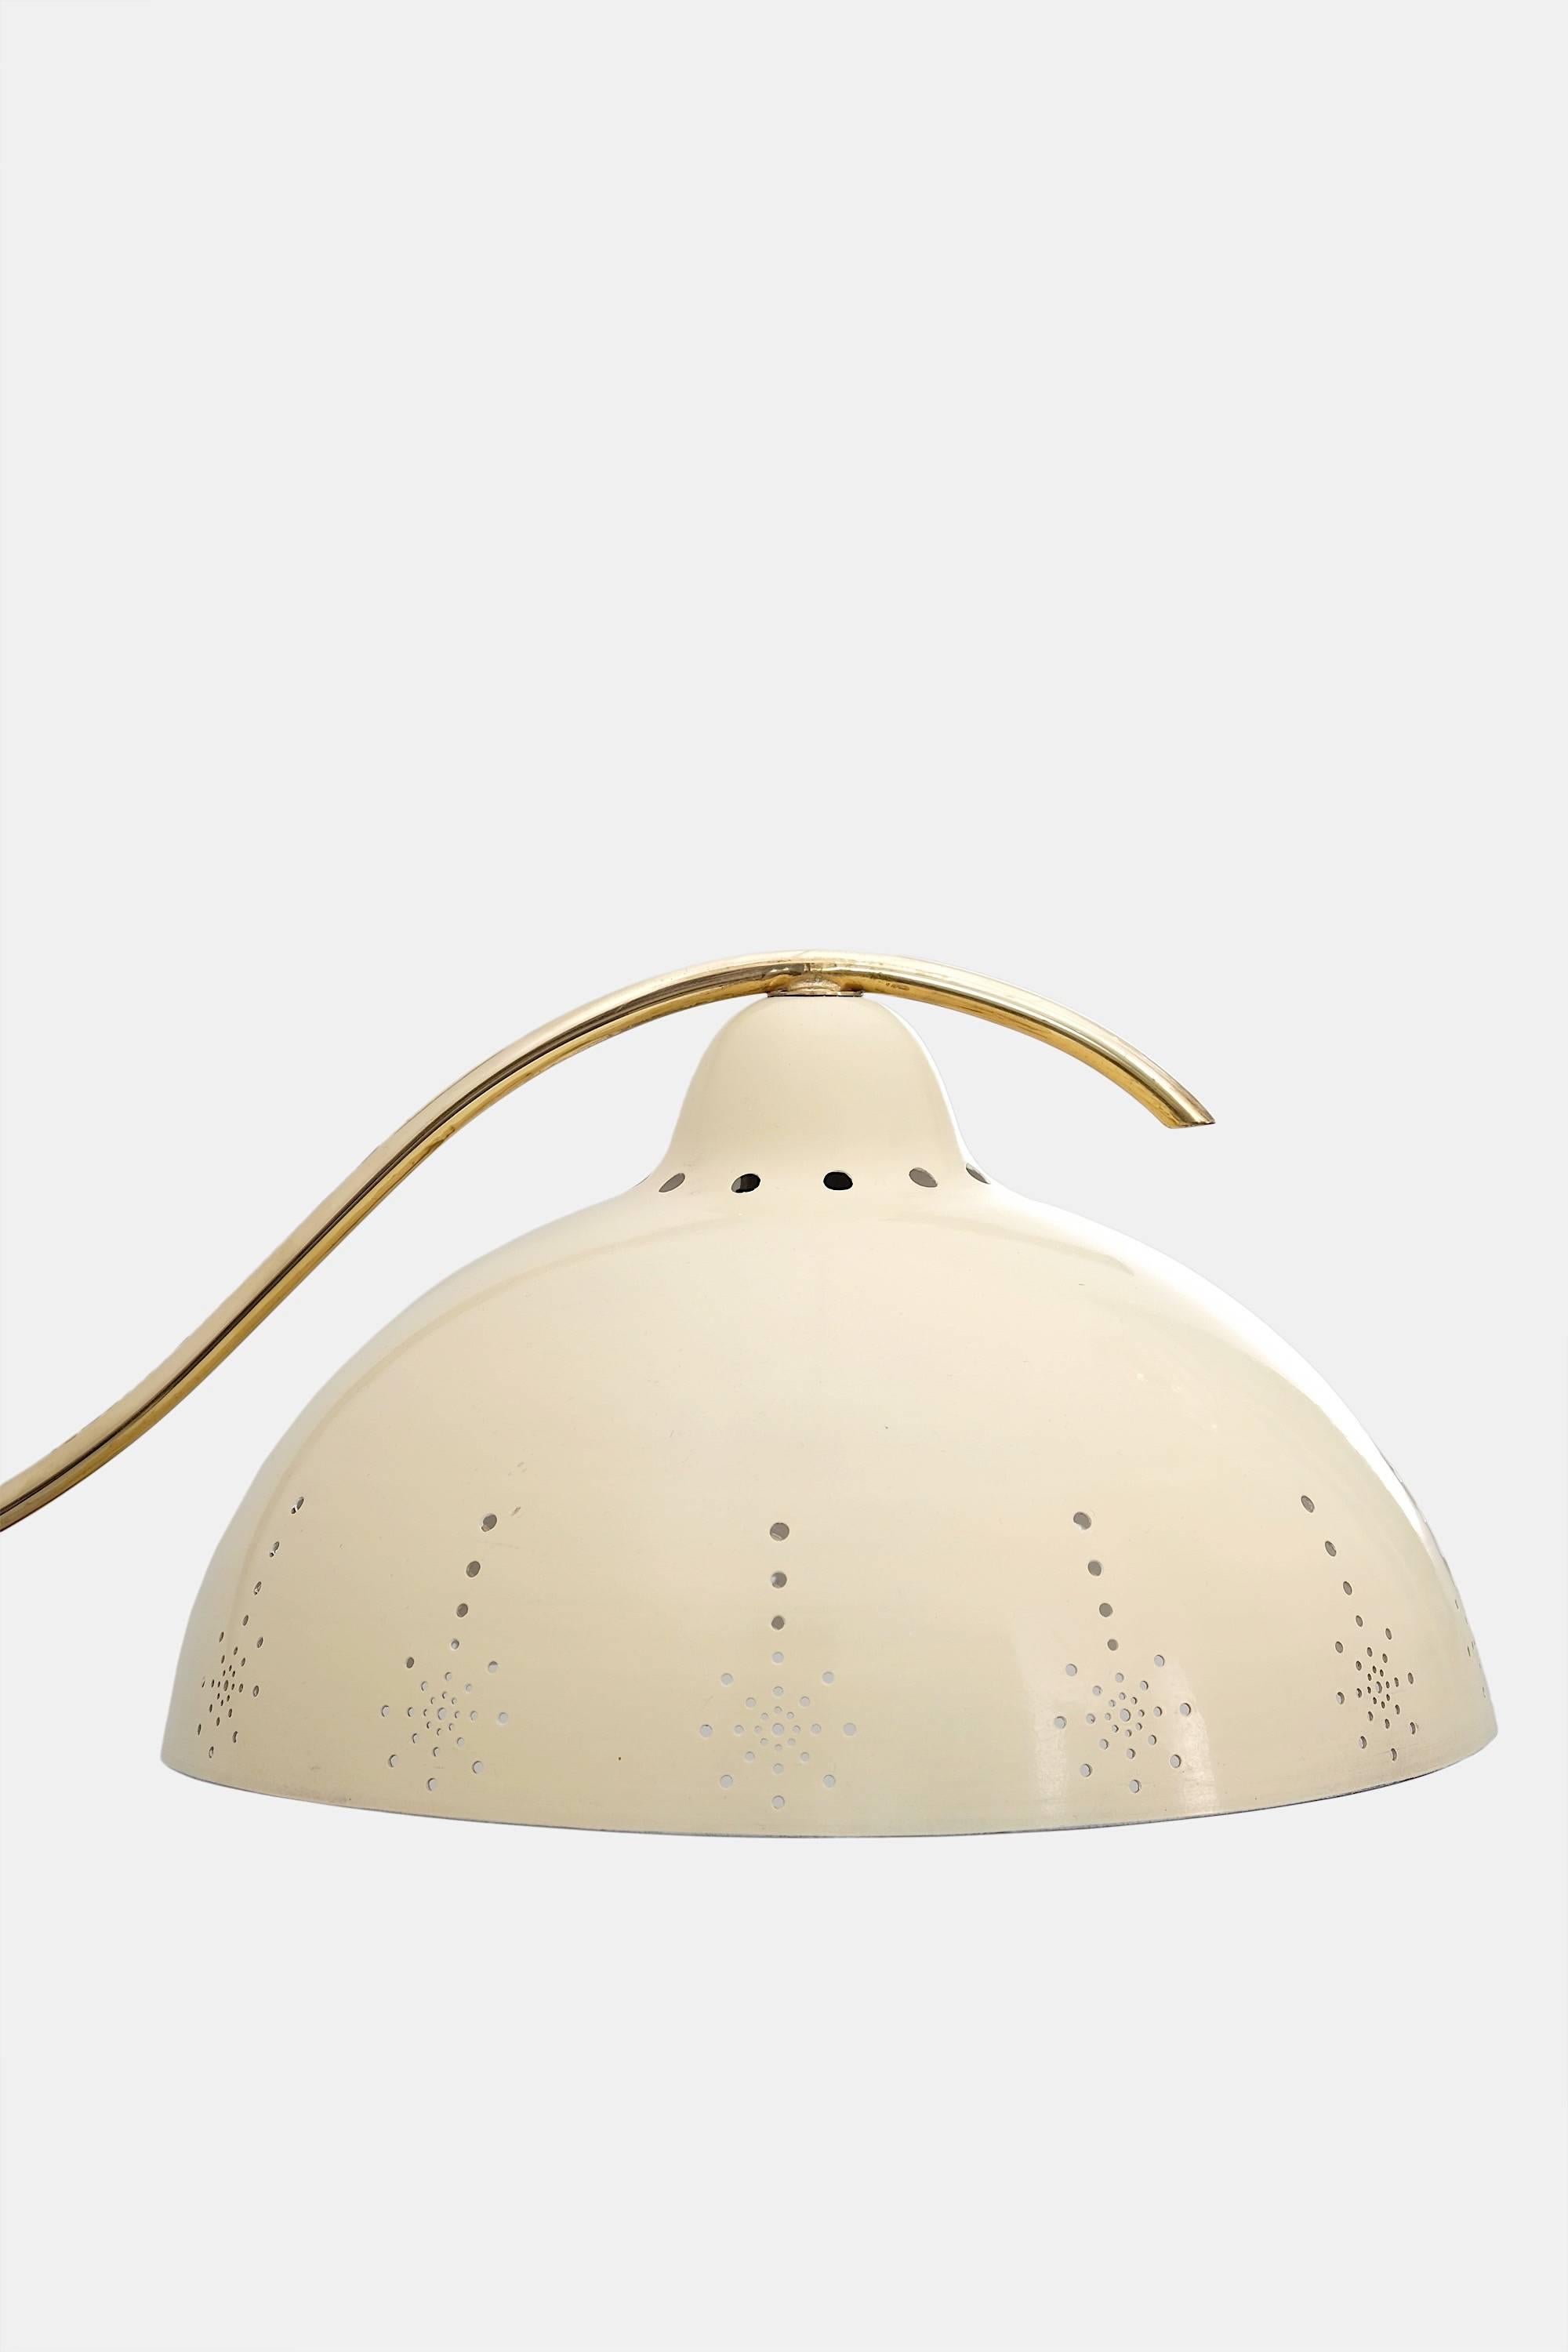 Mid-20th Century Brass Wall Lamp by Valinte, Finland, 1950s